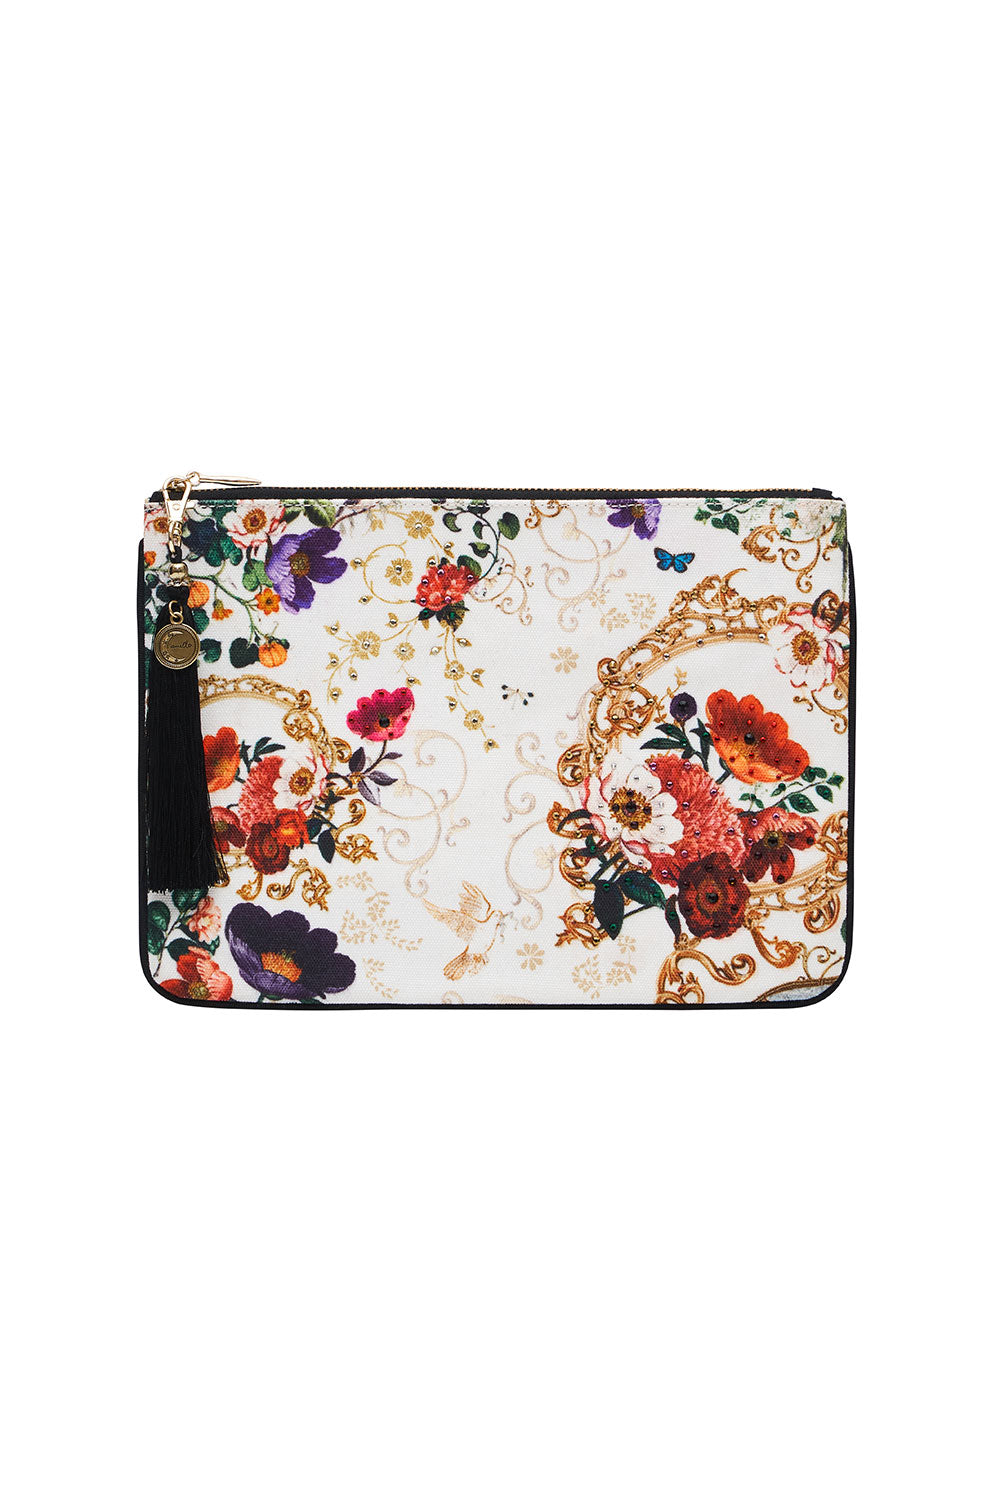 SMALL CANVAS CLUTCH FAIRY GODMOTHER